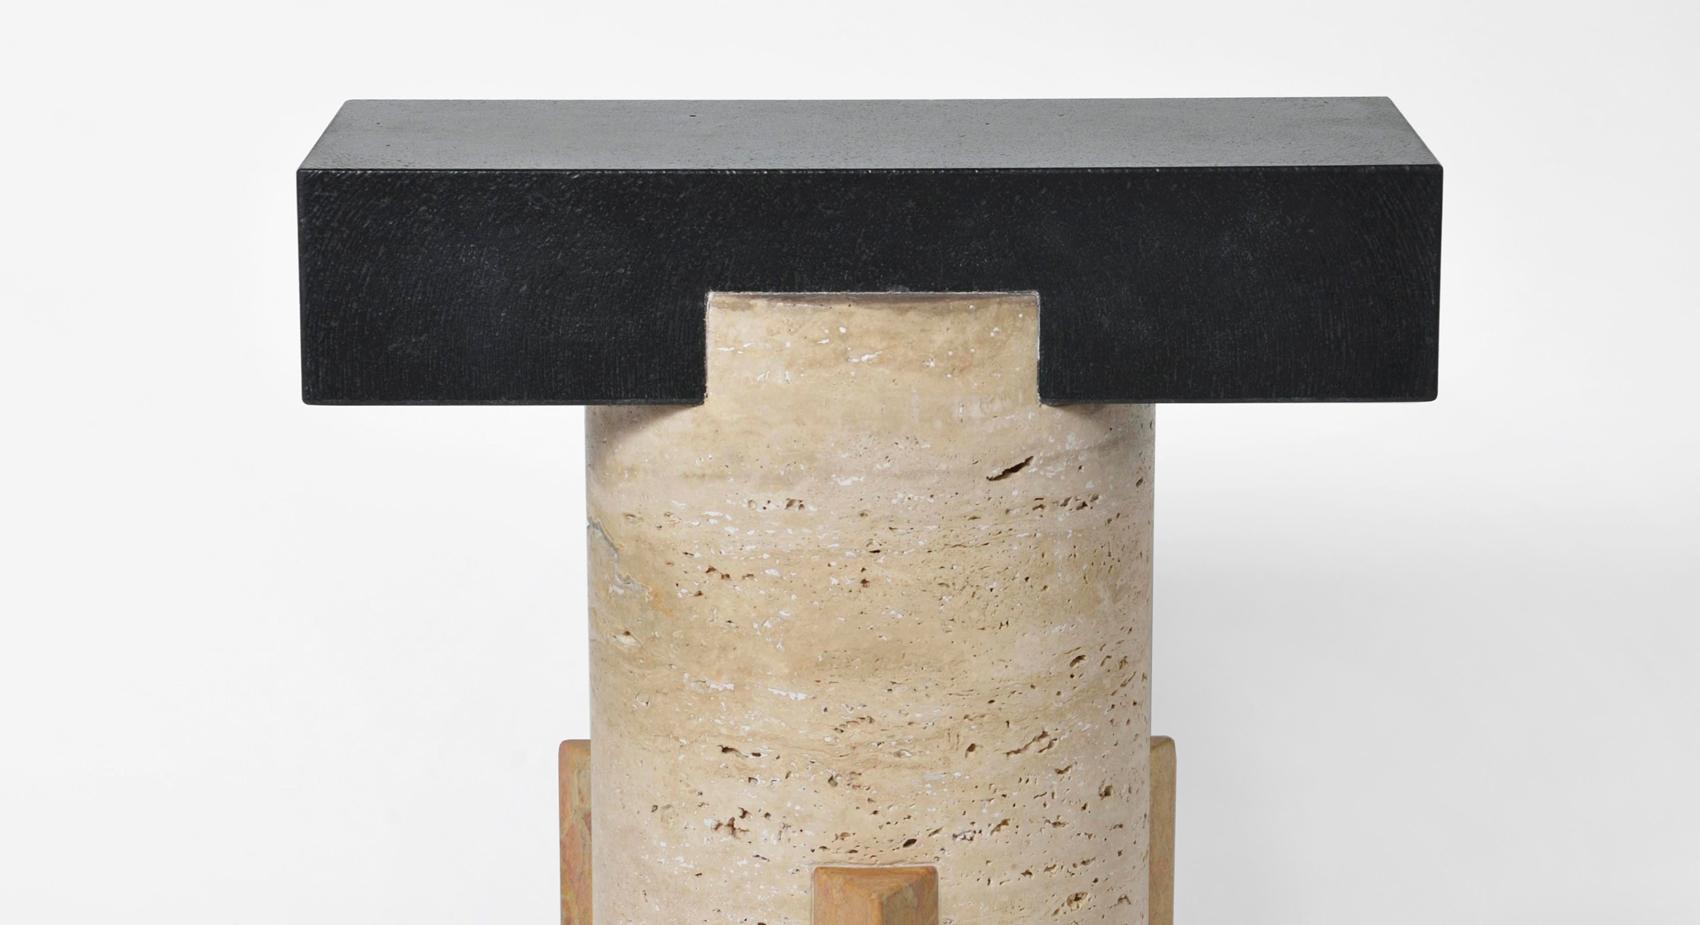 Kapital is a series of limited edition tables and stools based on essential forms, reminiscent of primordial stone capitals and simple geometric assemblages commonly found in classical architecture. The distinct and characteristic profiles,